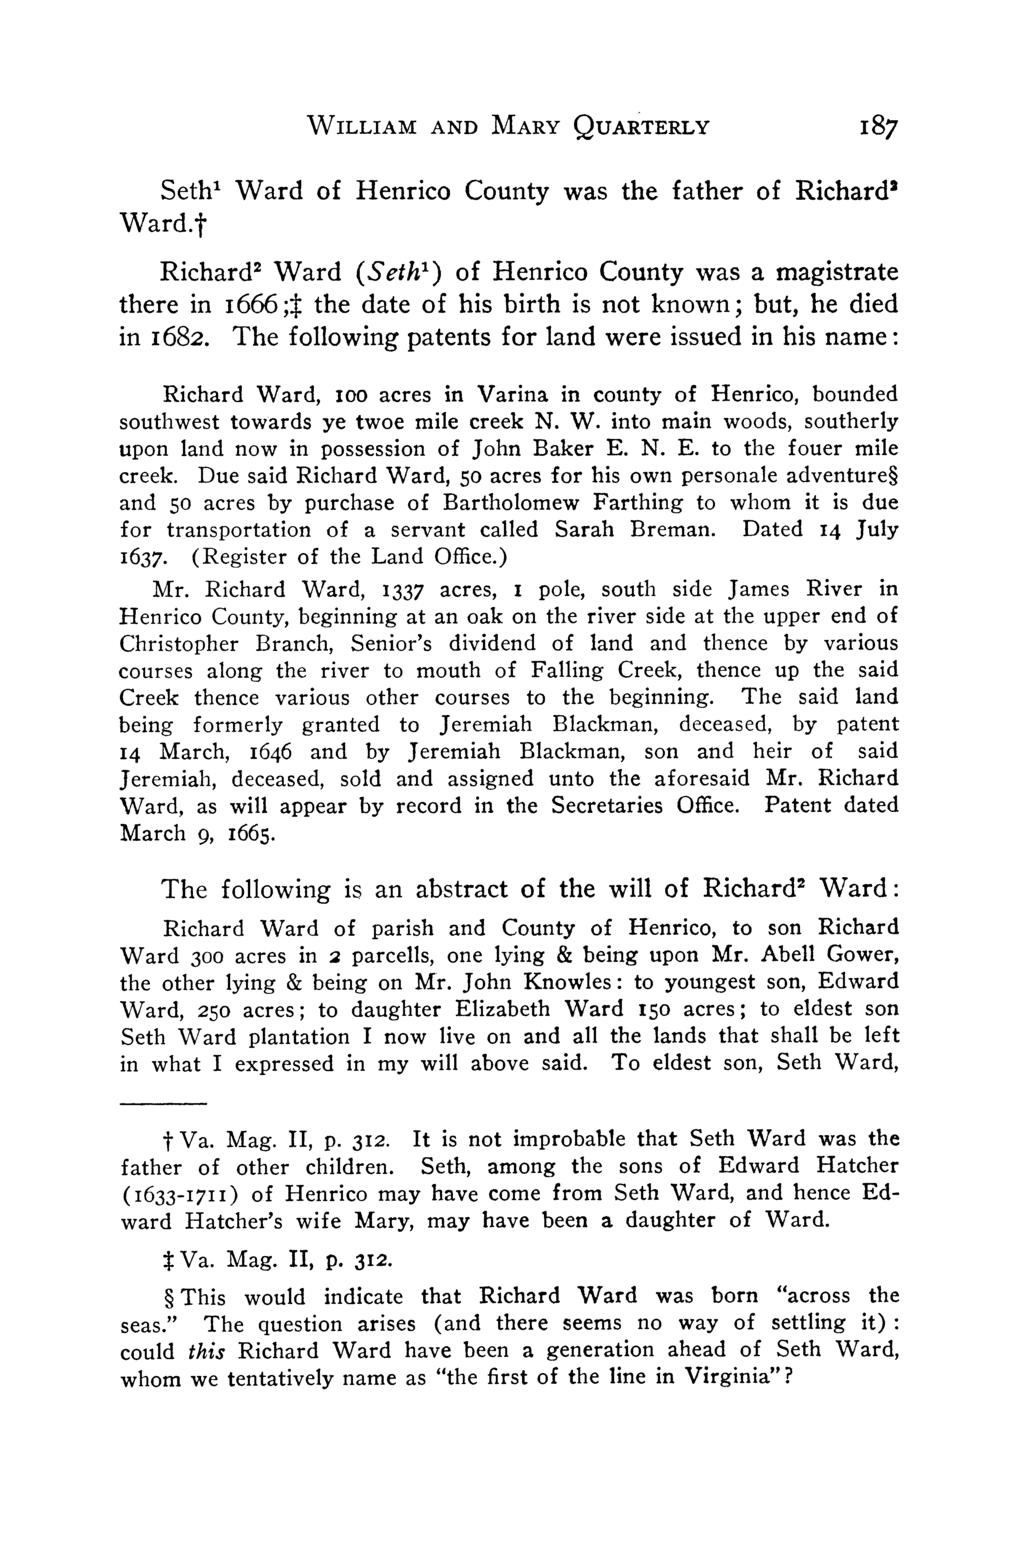 Ward.t Seth' Ward of Henrico County was the father of Richard2 Richard2 Ward (Seth') of Henrico County was a magistrate there in i666;t the date of his birth is not known; but, he died in i682.